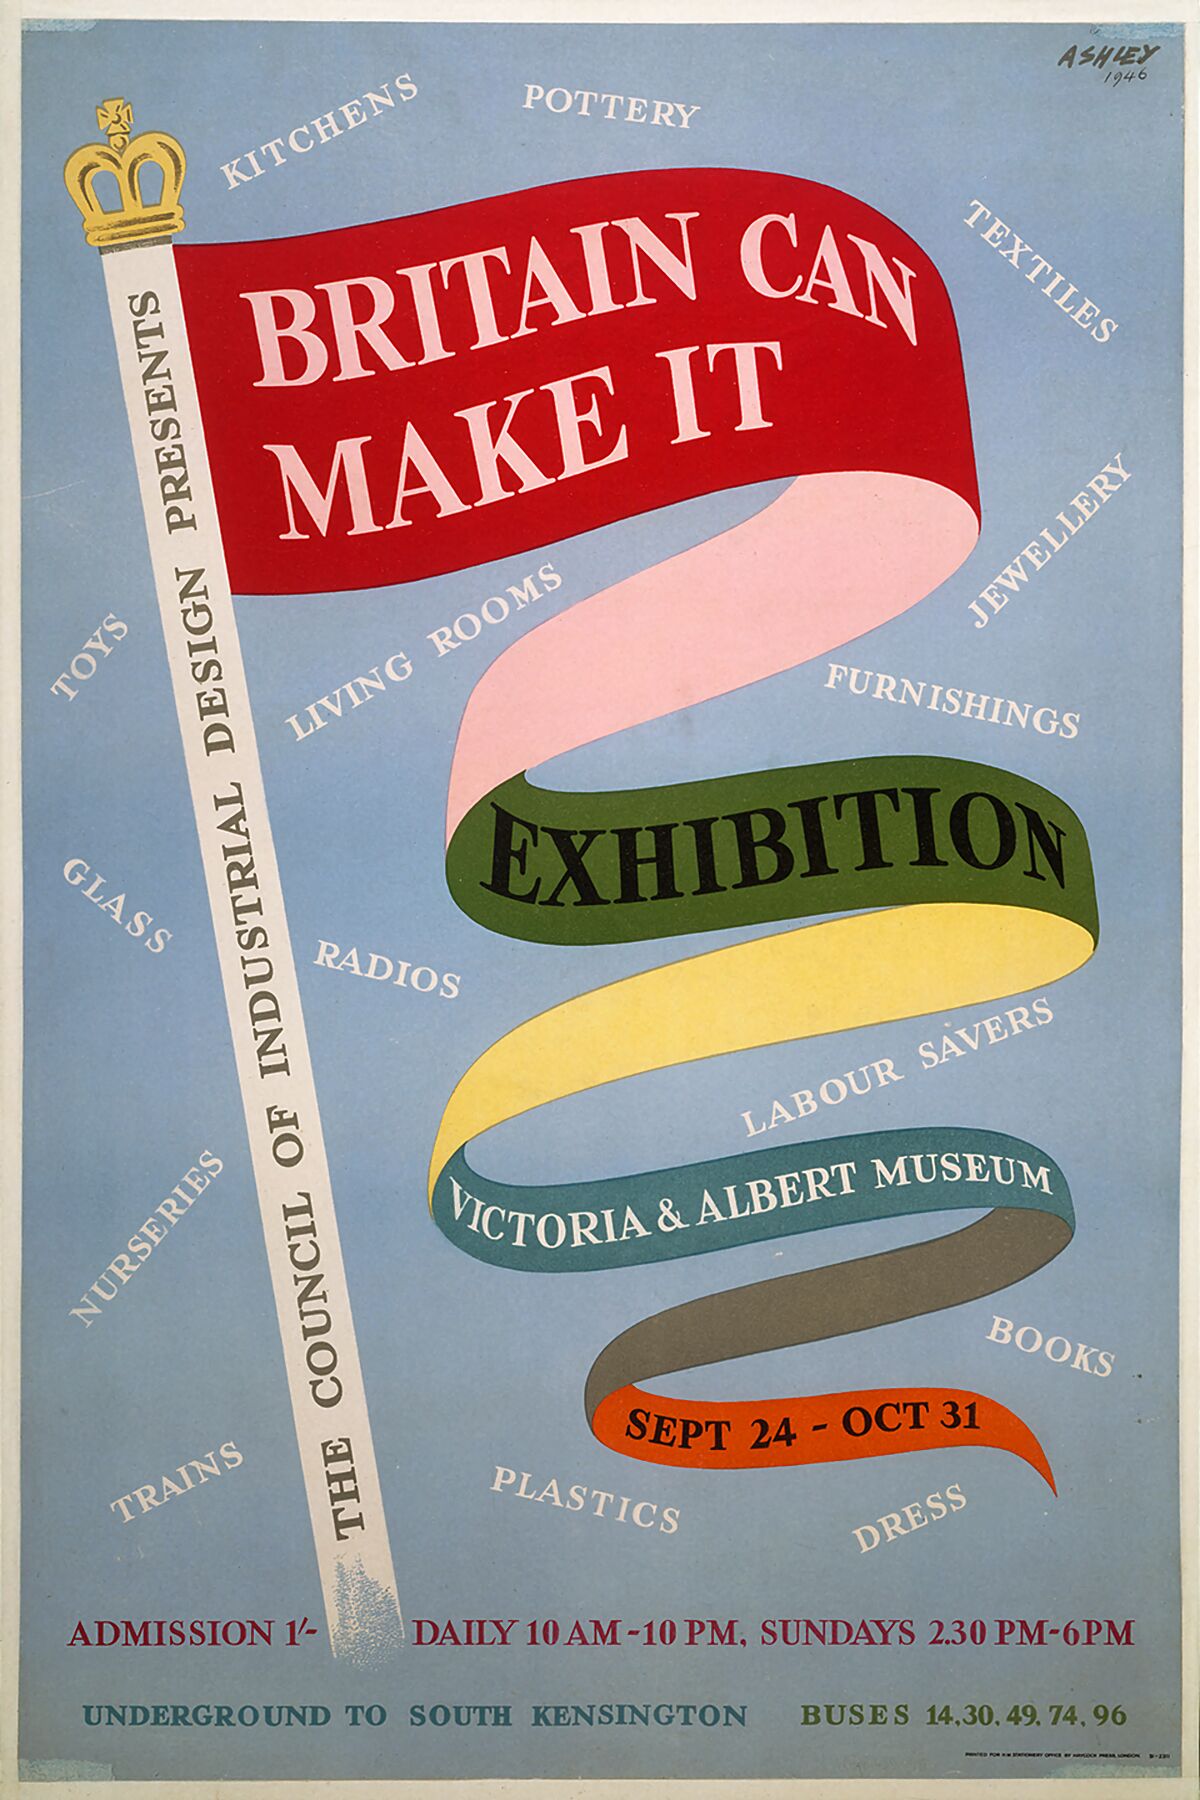 Britain Can Make It by Ashley Havinden for the Council of Industrial Design - 1946